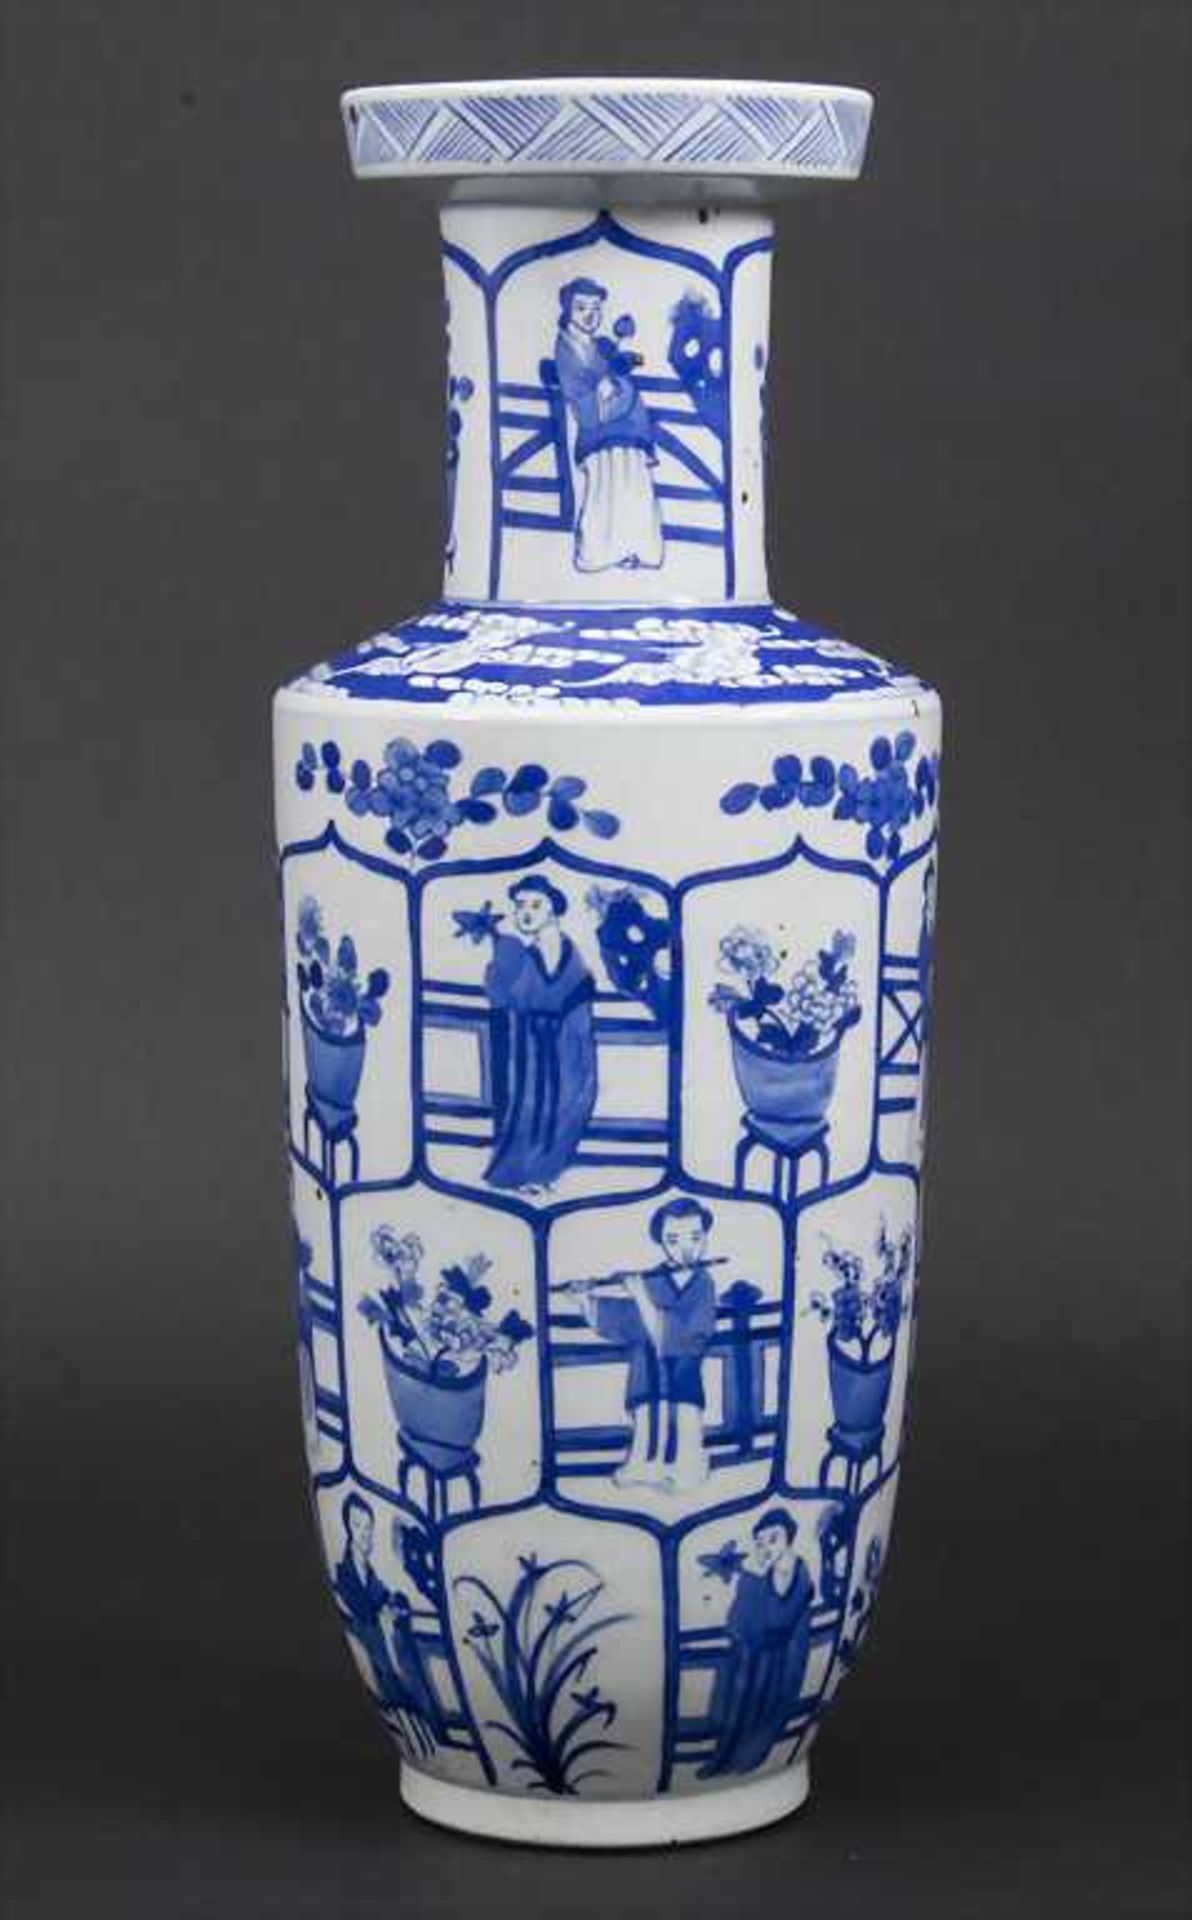 Ziervase / A decorative vase, China, Qing-Dynastie (1644-1911), wohl Kangxi-Periode (1662-1722) - Image 2 of 5